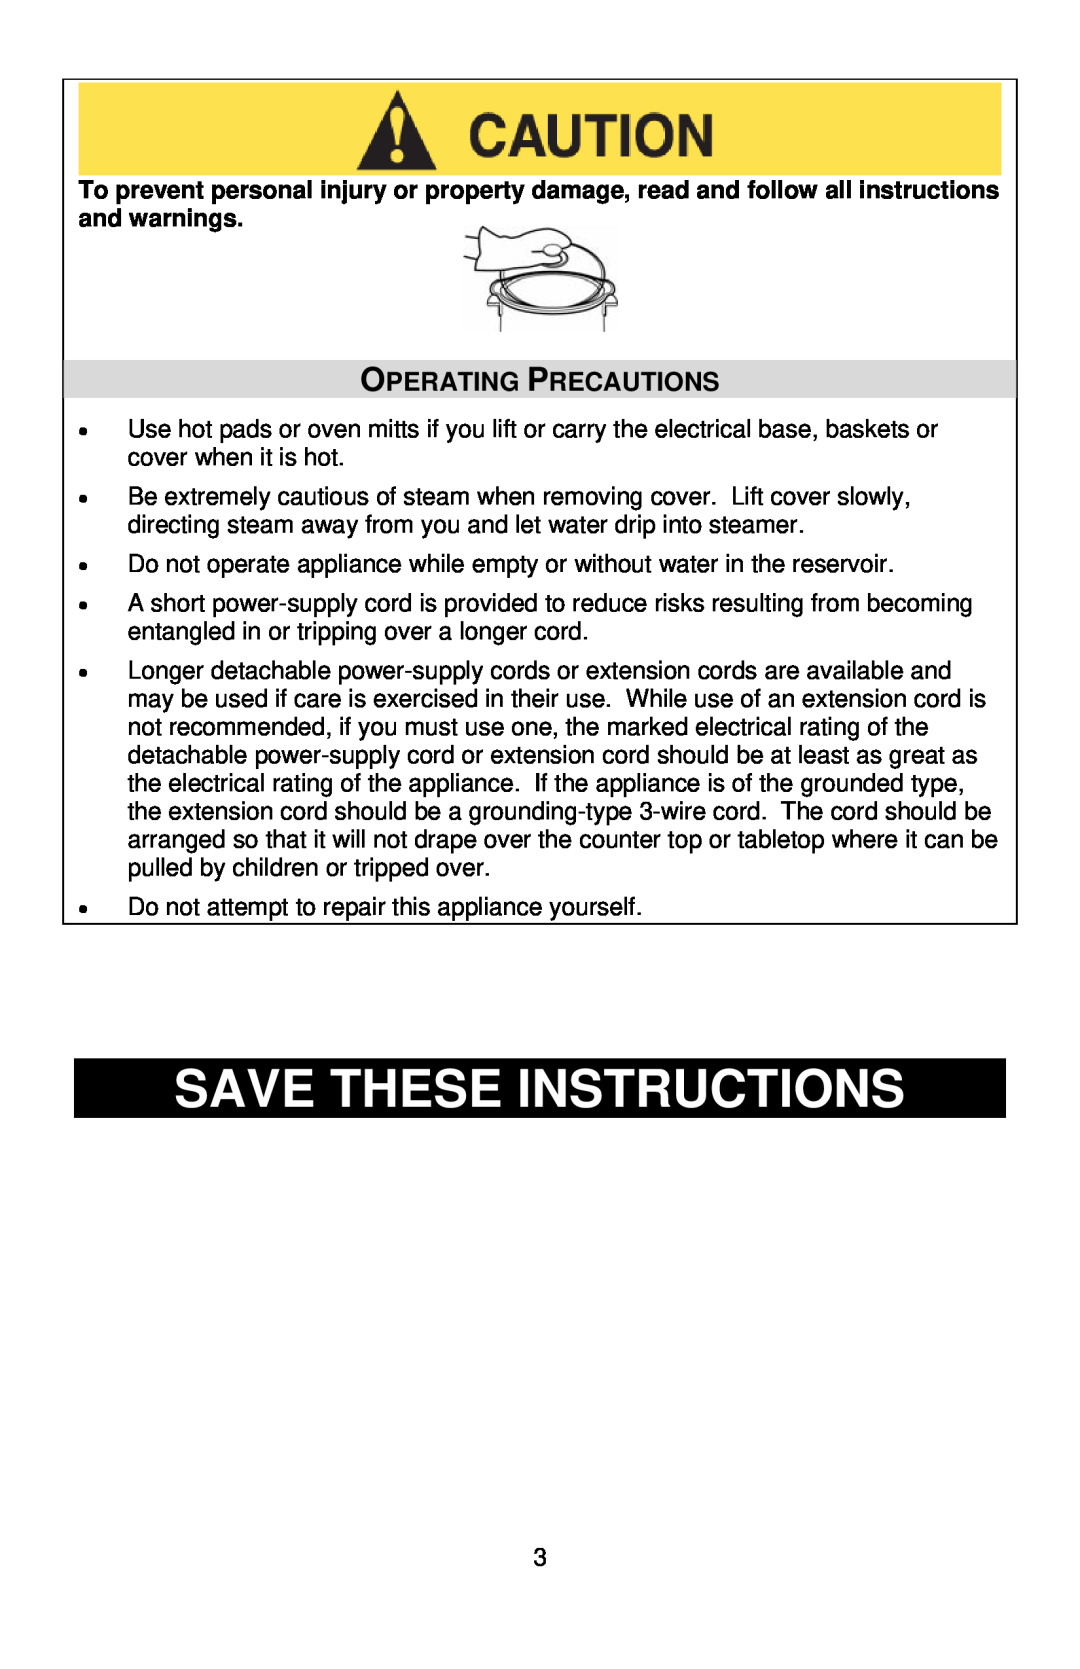 West Bend 86604, L5674B instruction manual Save These Instructions, Operating Precautions 